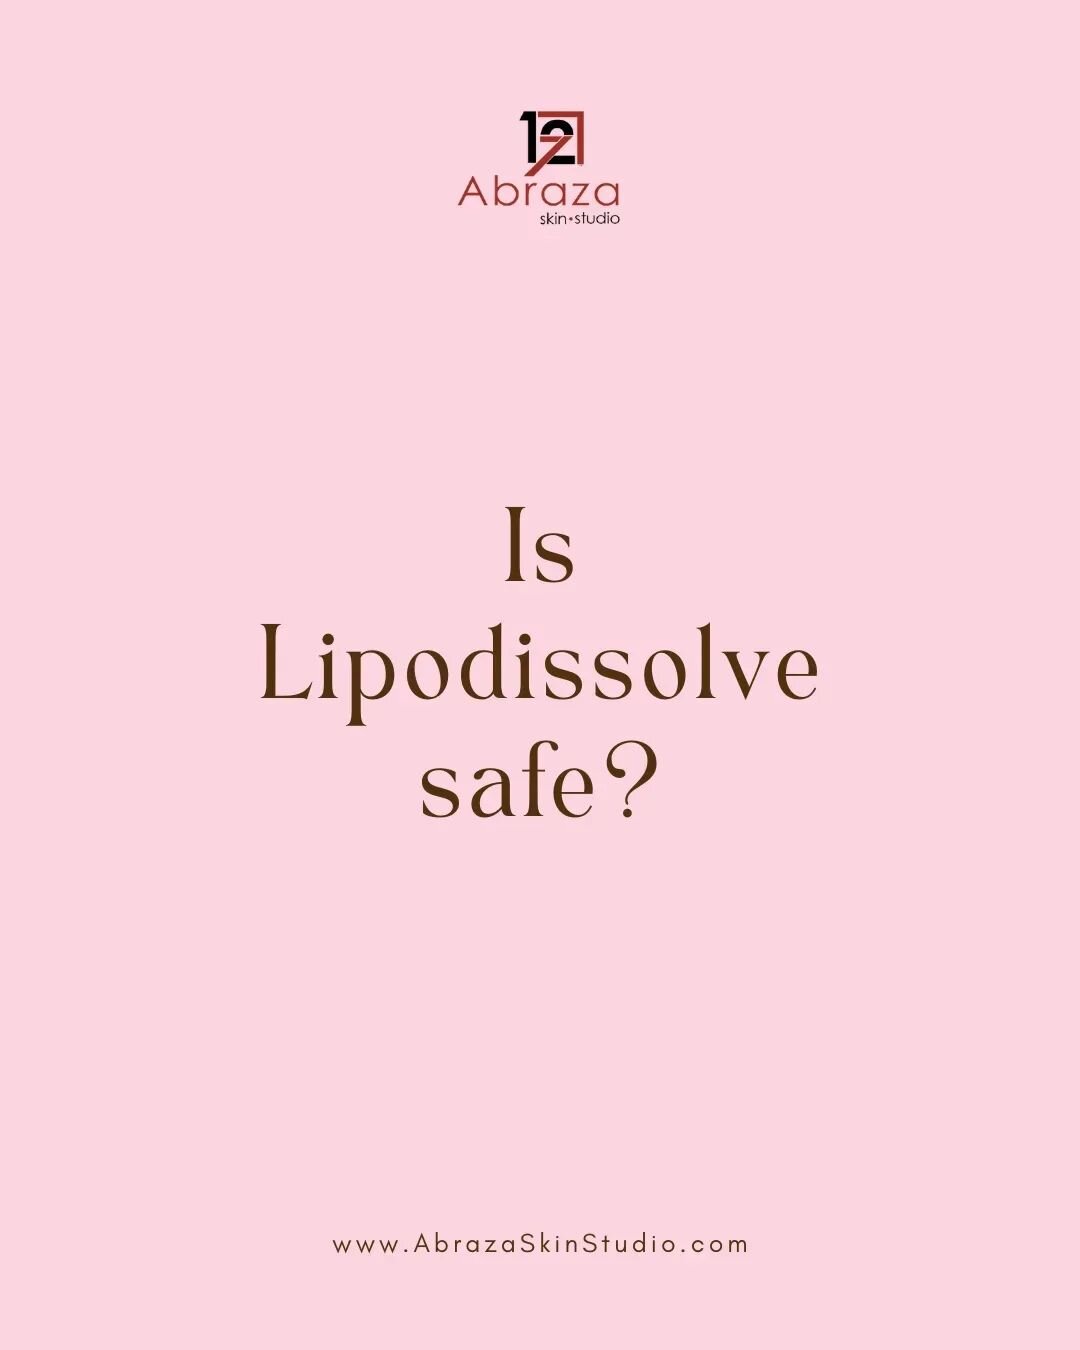 If you're in search of a non-surgical method for body contouring that offers minimal downtime and mild discomfort, Lipodissolve could be the ideal choice. With its quicker procedure time, enhanced safety measures, and reduced pain levels, it provides